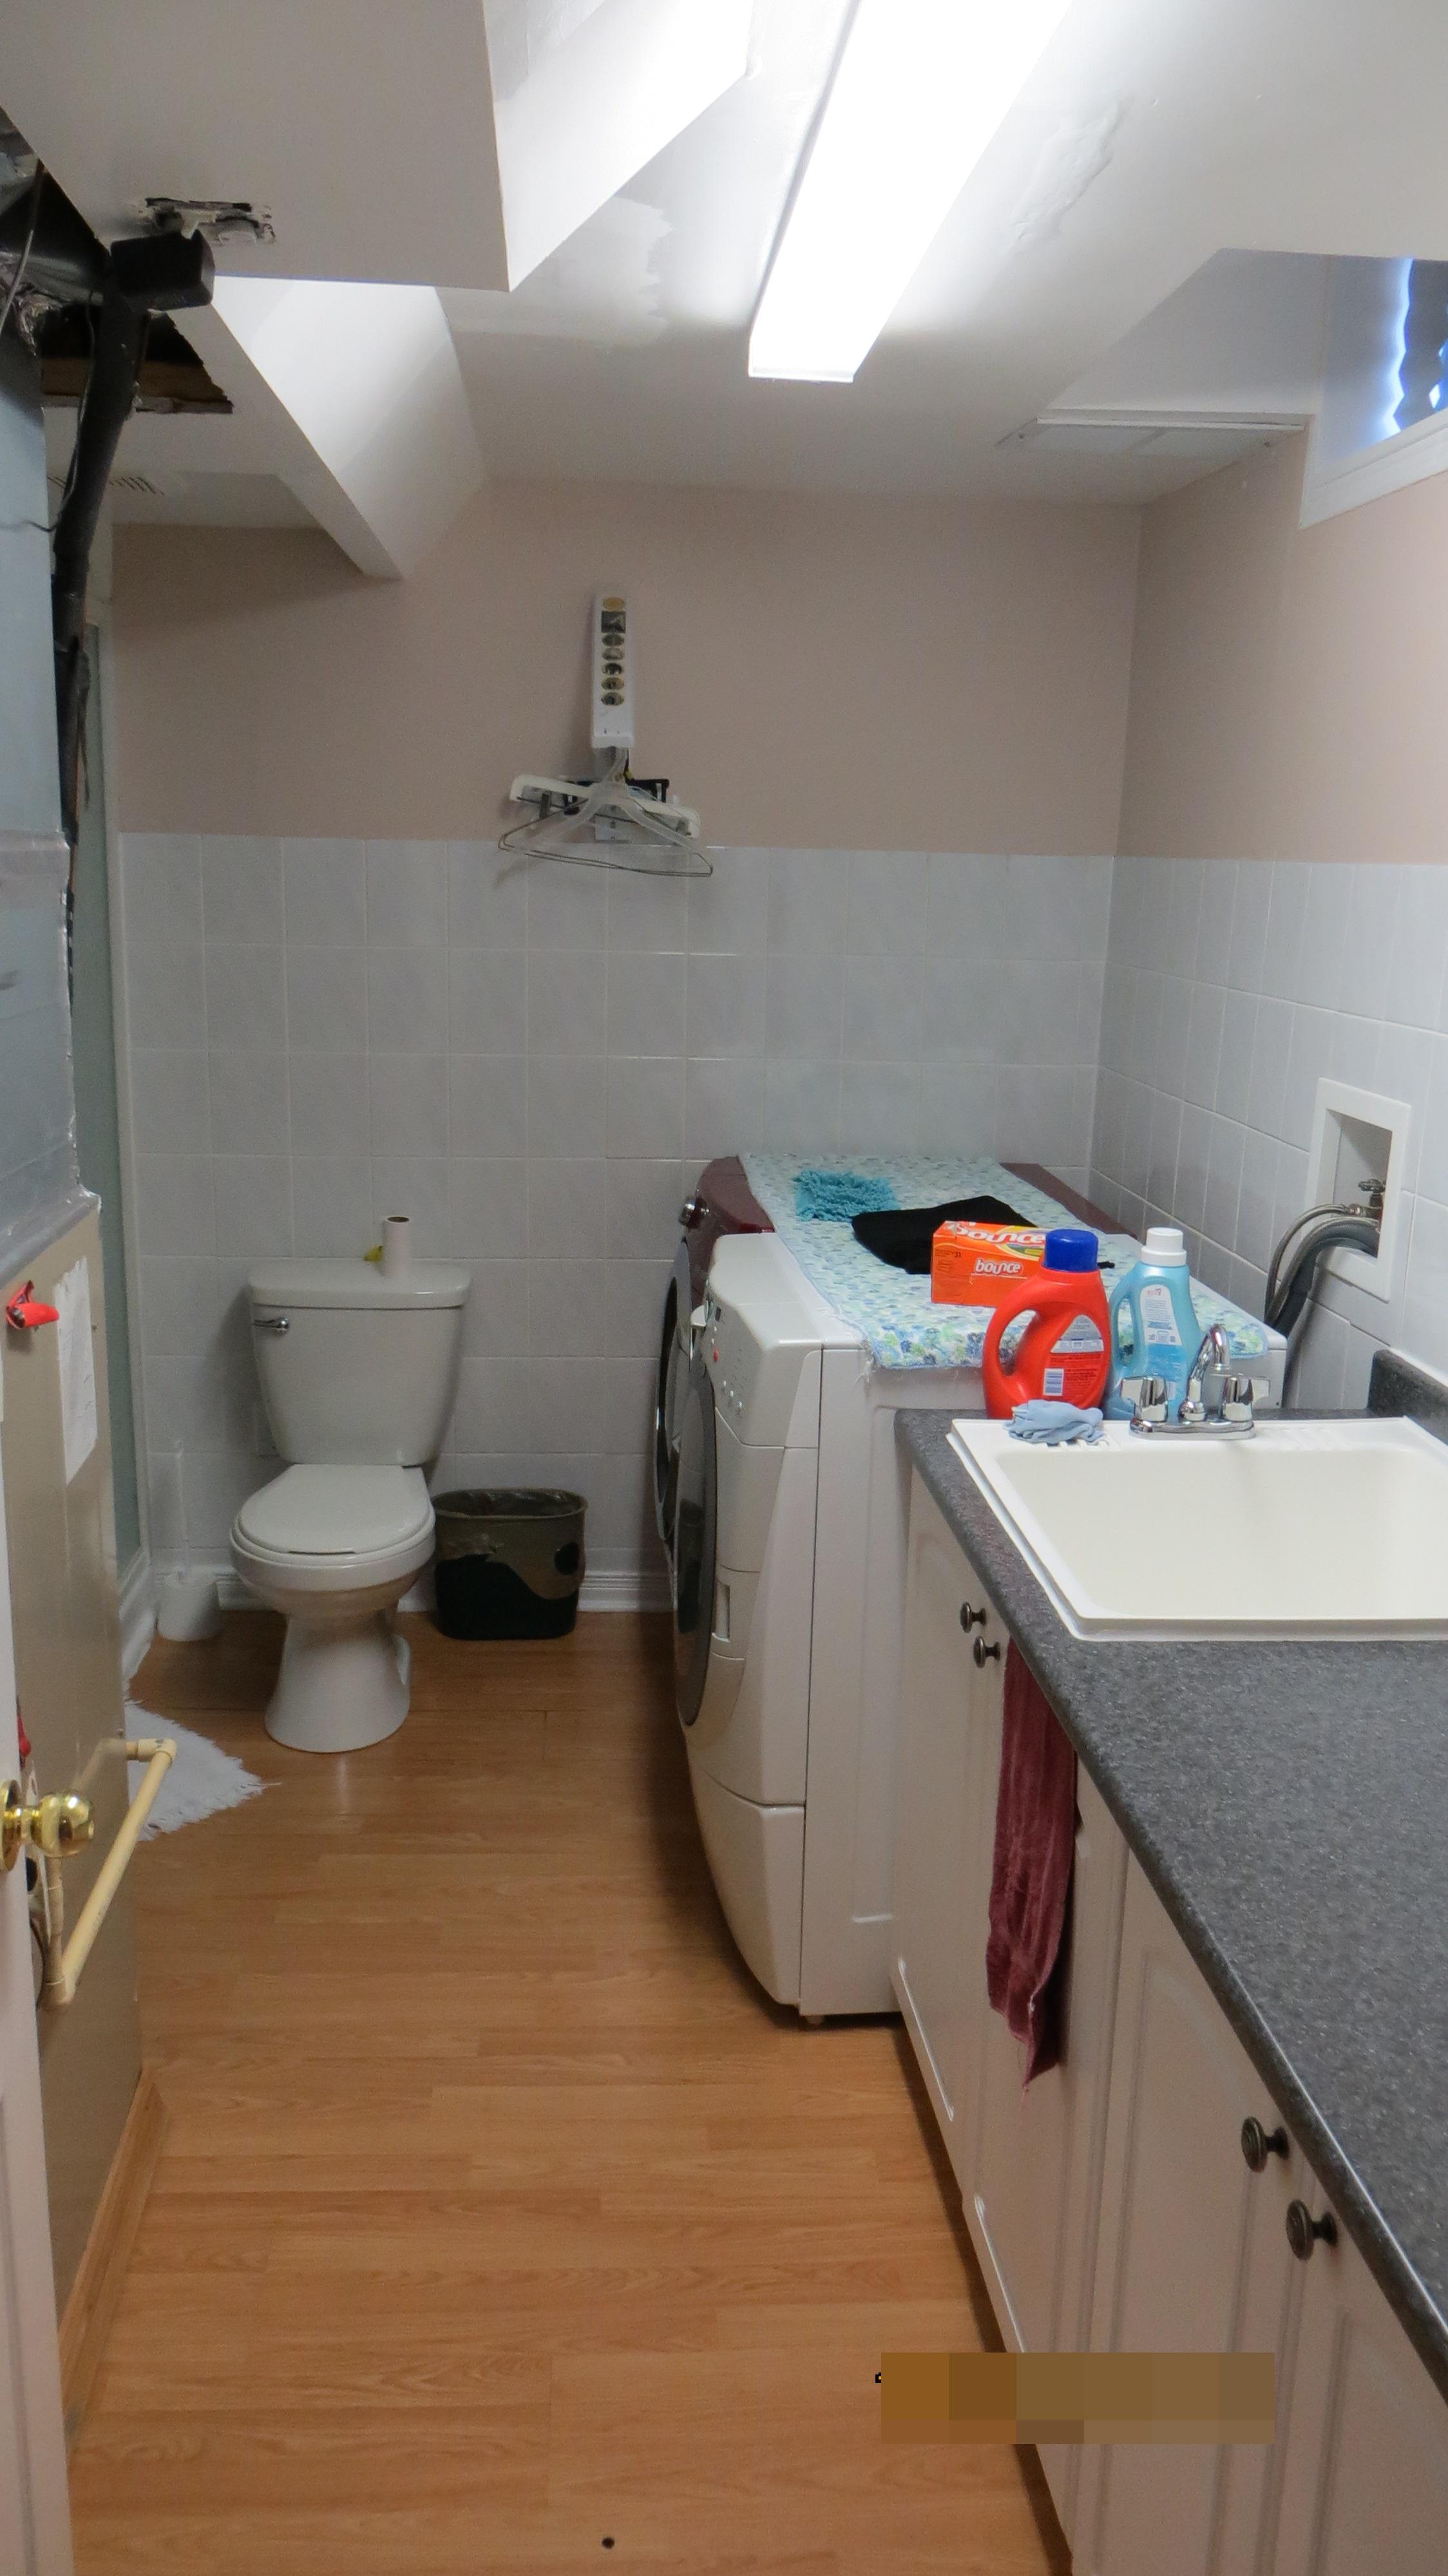 Toilet and laundry over laminate flooring